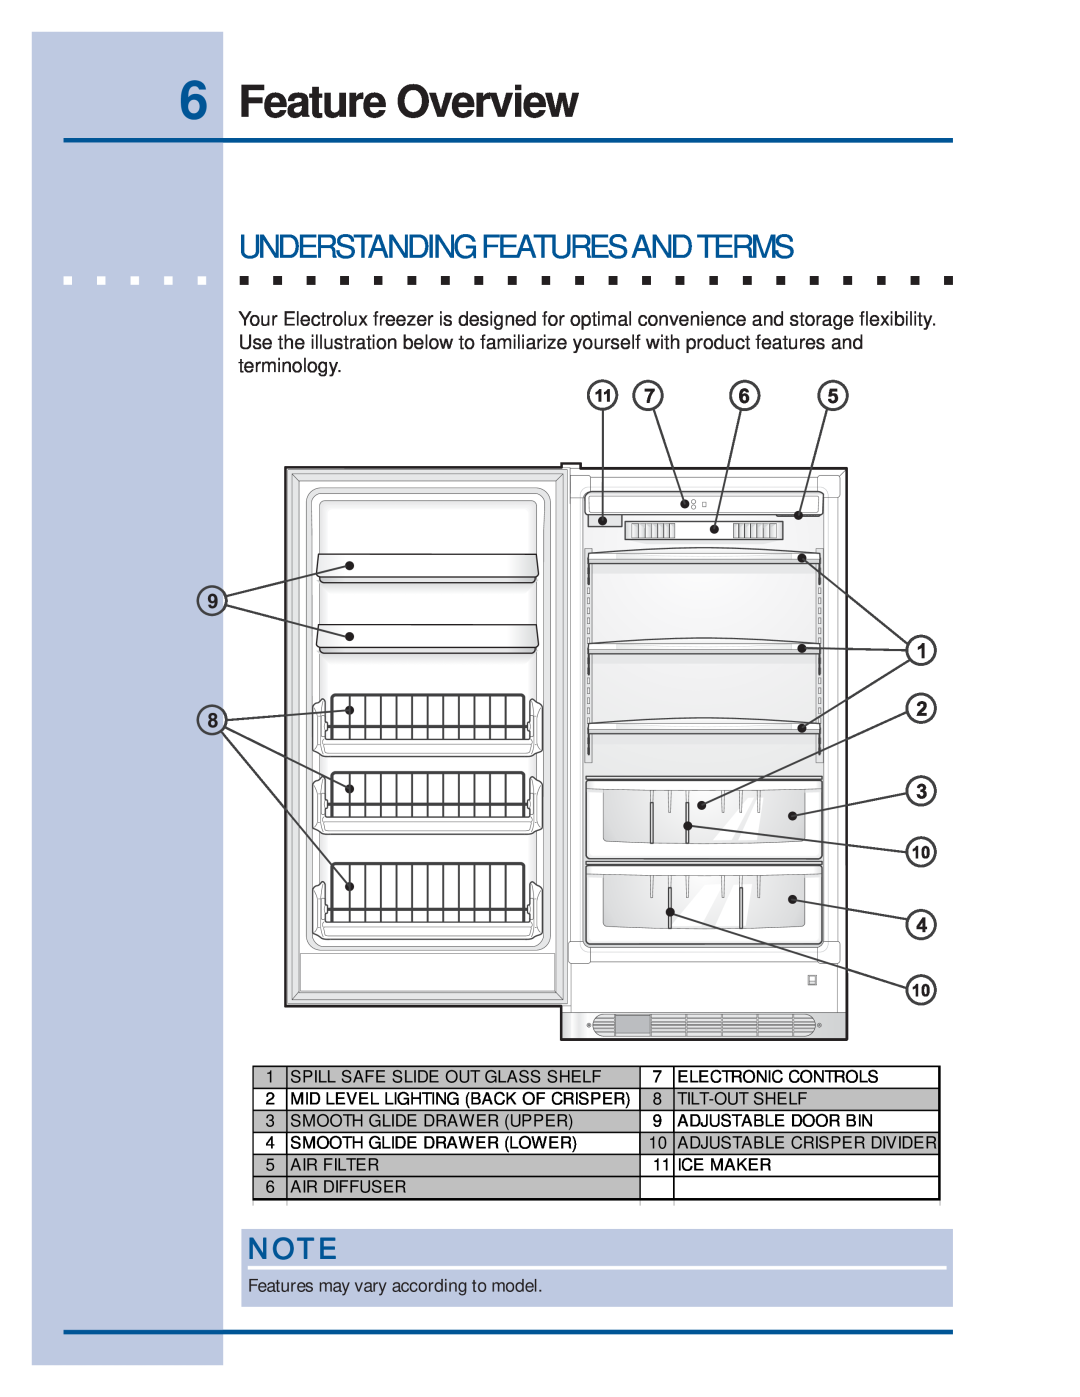 Electrolux Refrigerator manual Feature Overview, Understanding Features And Terms, Spill Safe Slide Out Glass Shelf 